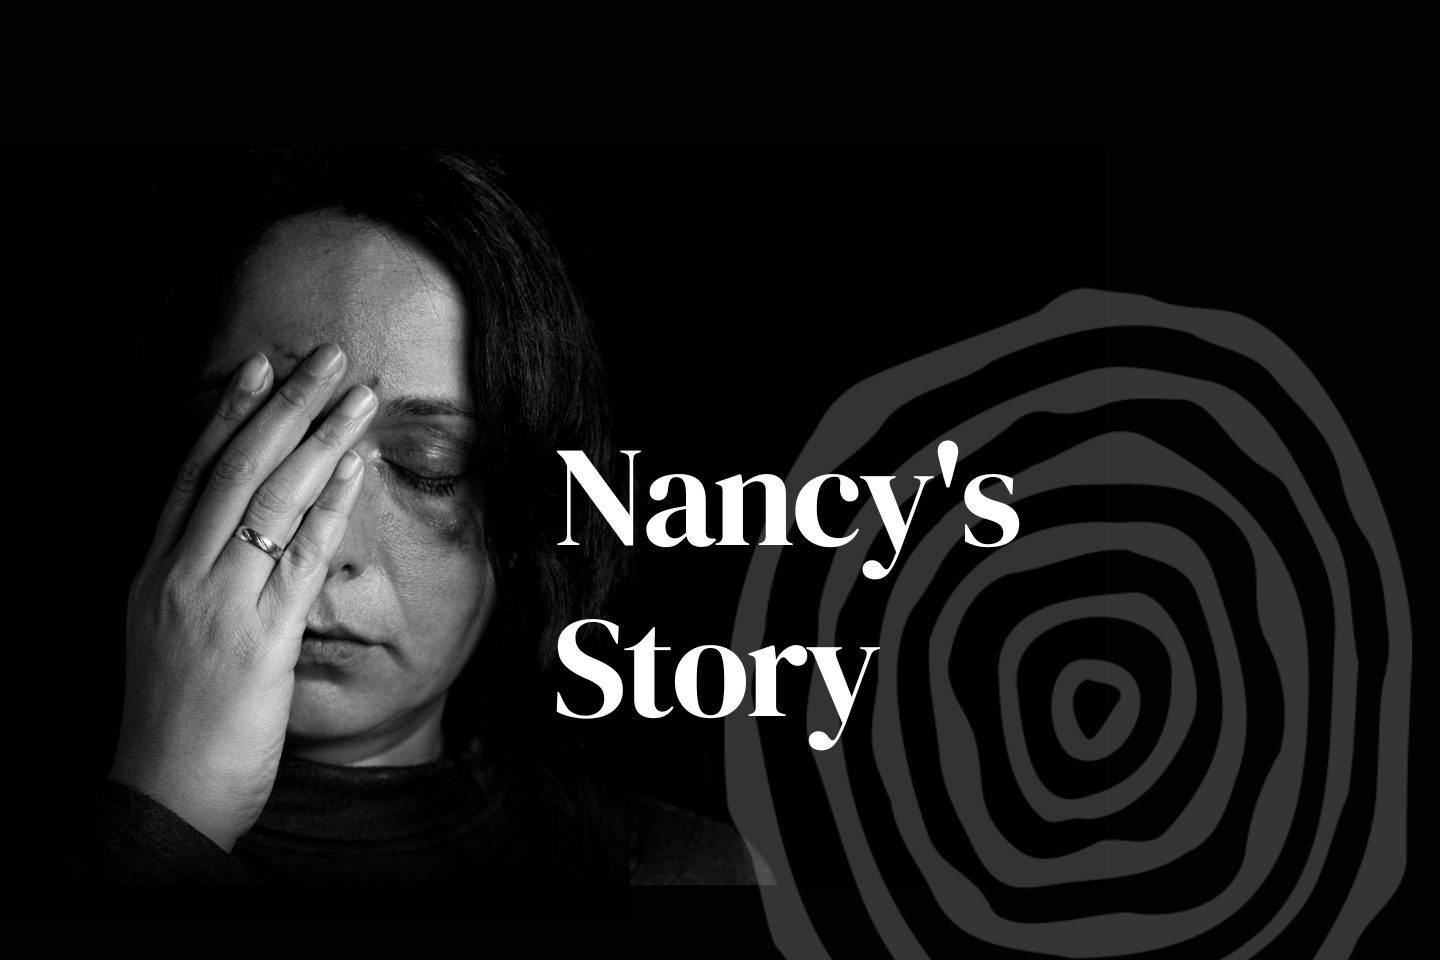 Traumatized woman holds her hand to her face with closed eyes. Text says "Nancy's story".